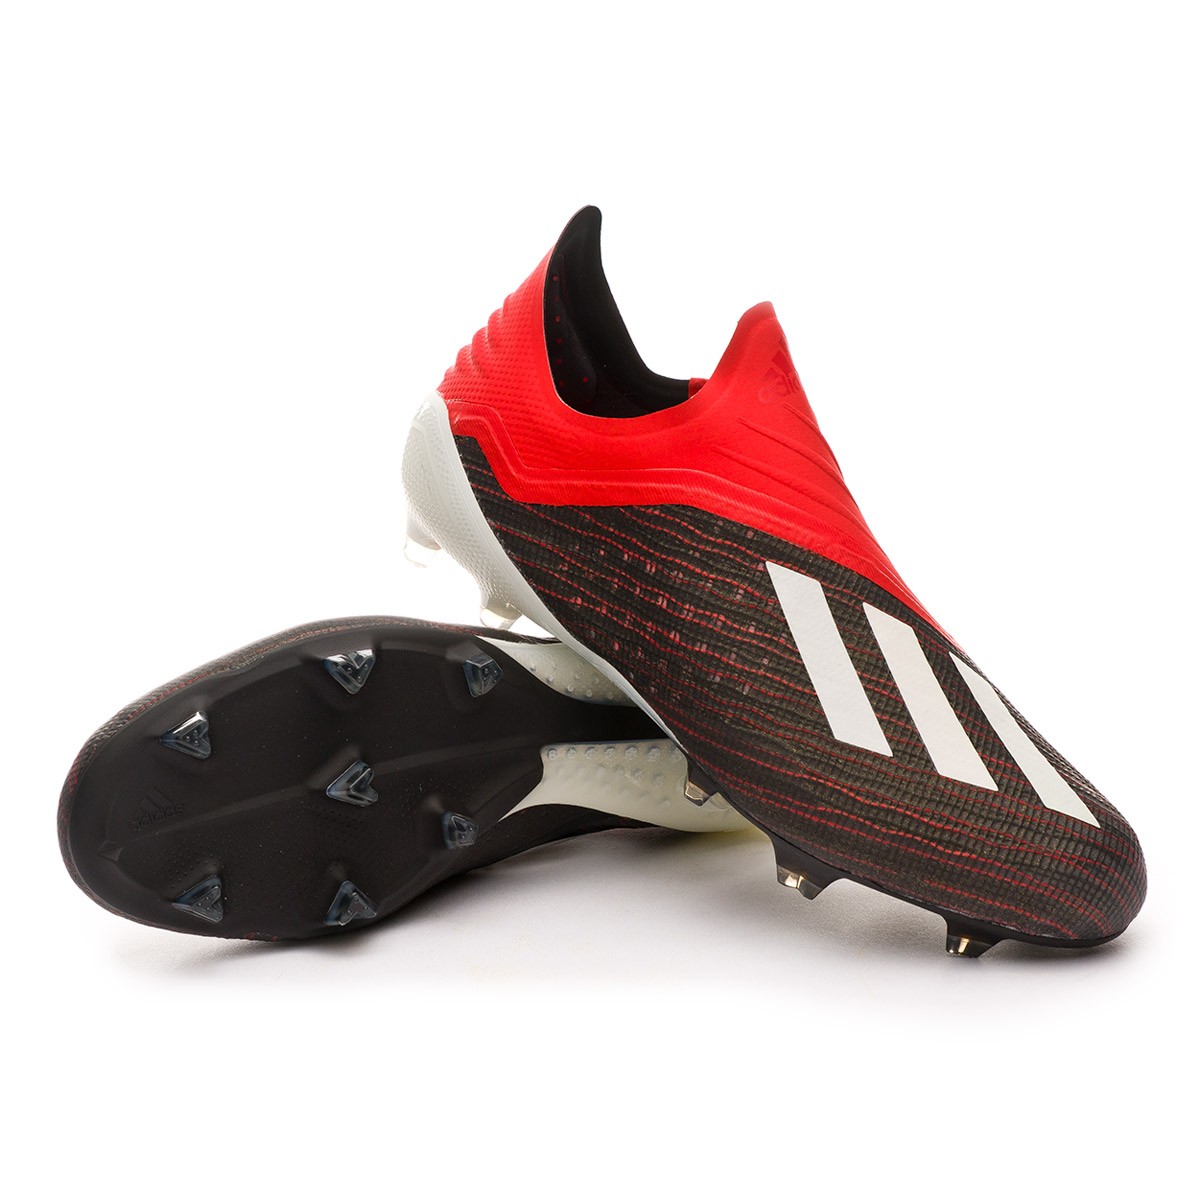 red and black adidas football boots